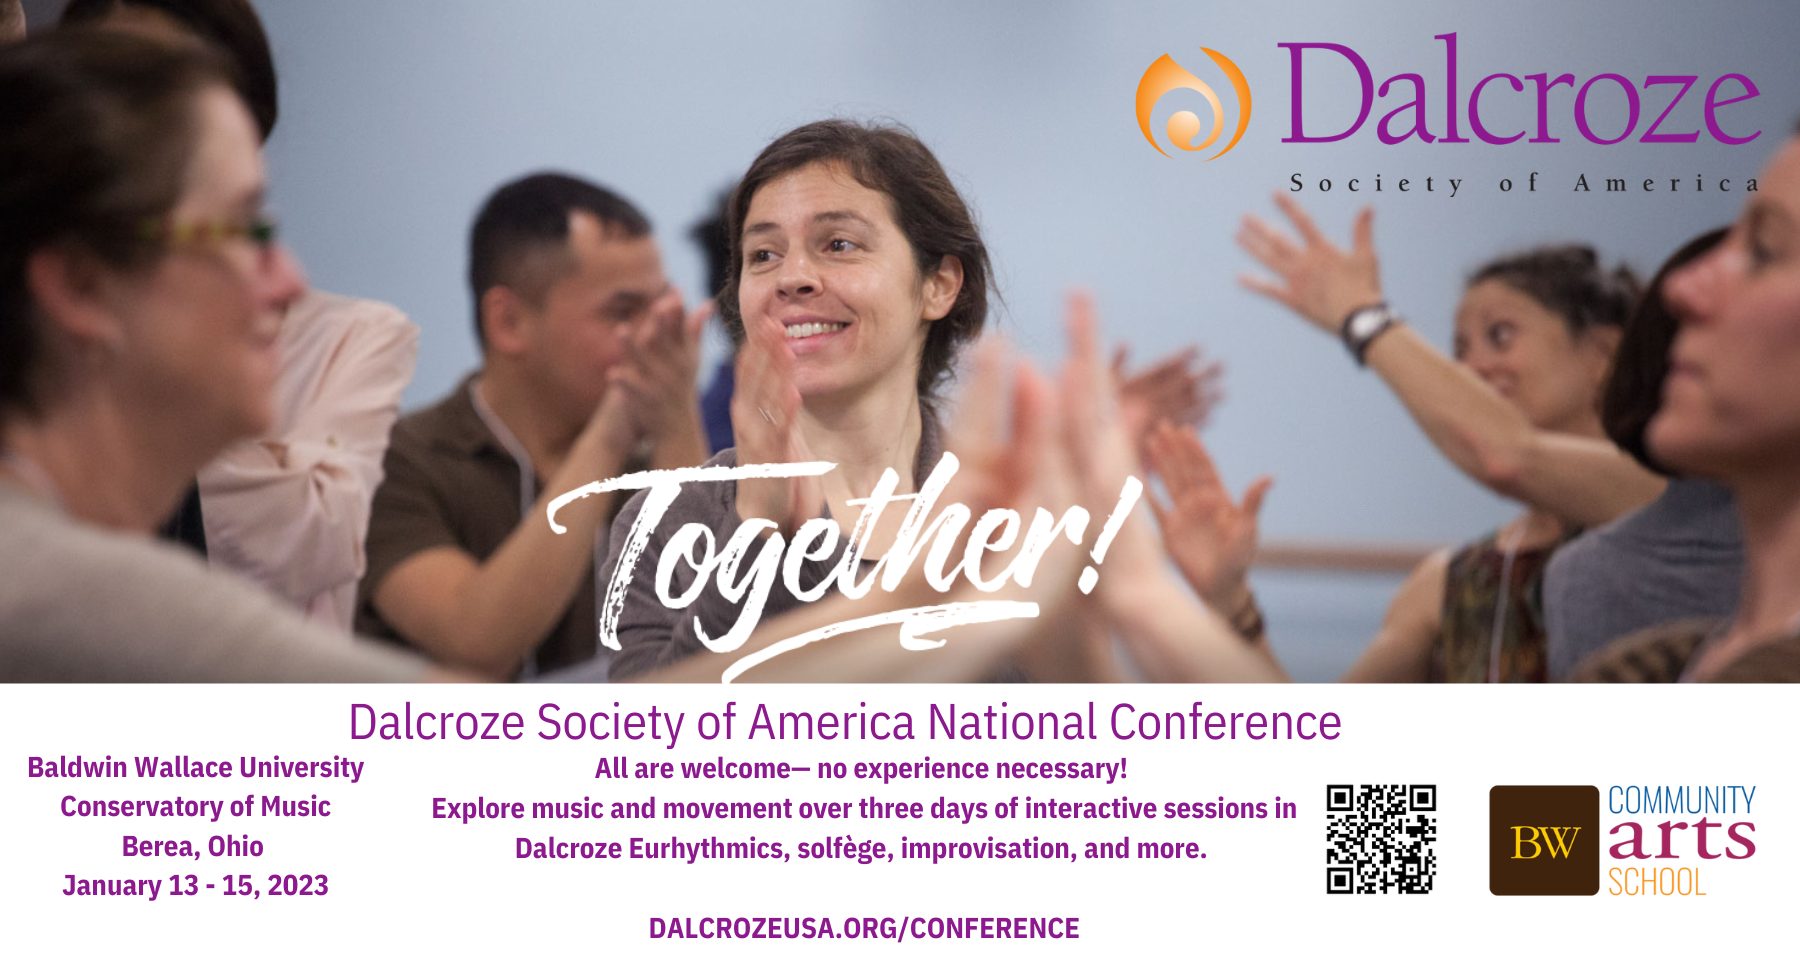 The Dalcroze Society of America's 2023 National Conference, "Together!”